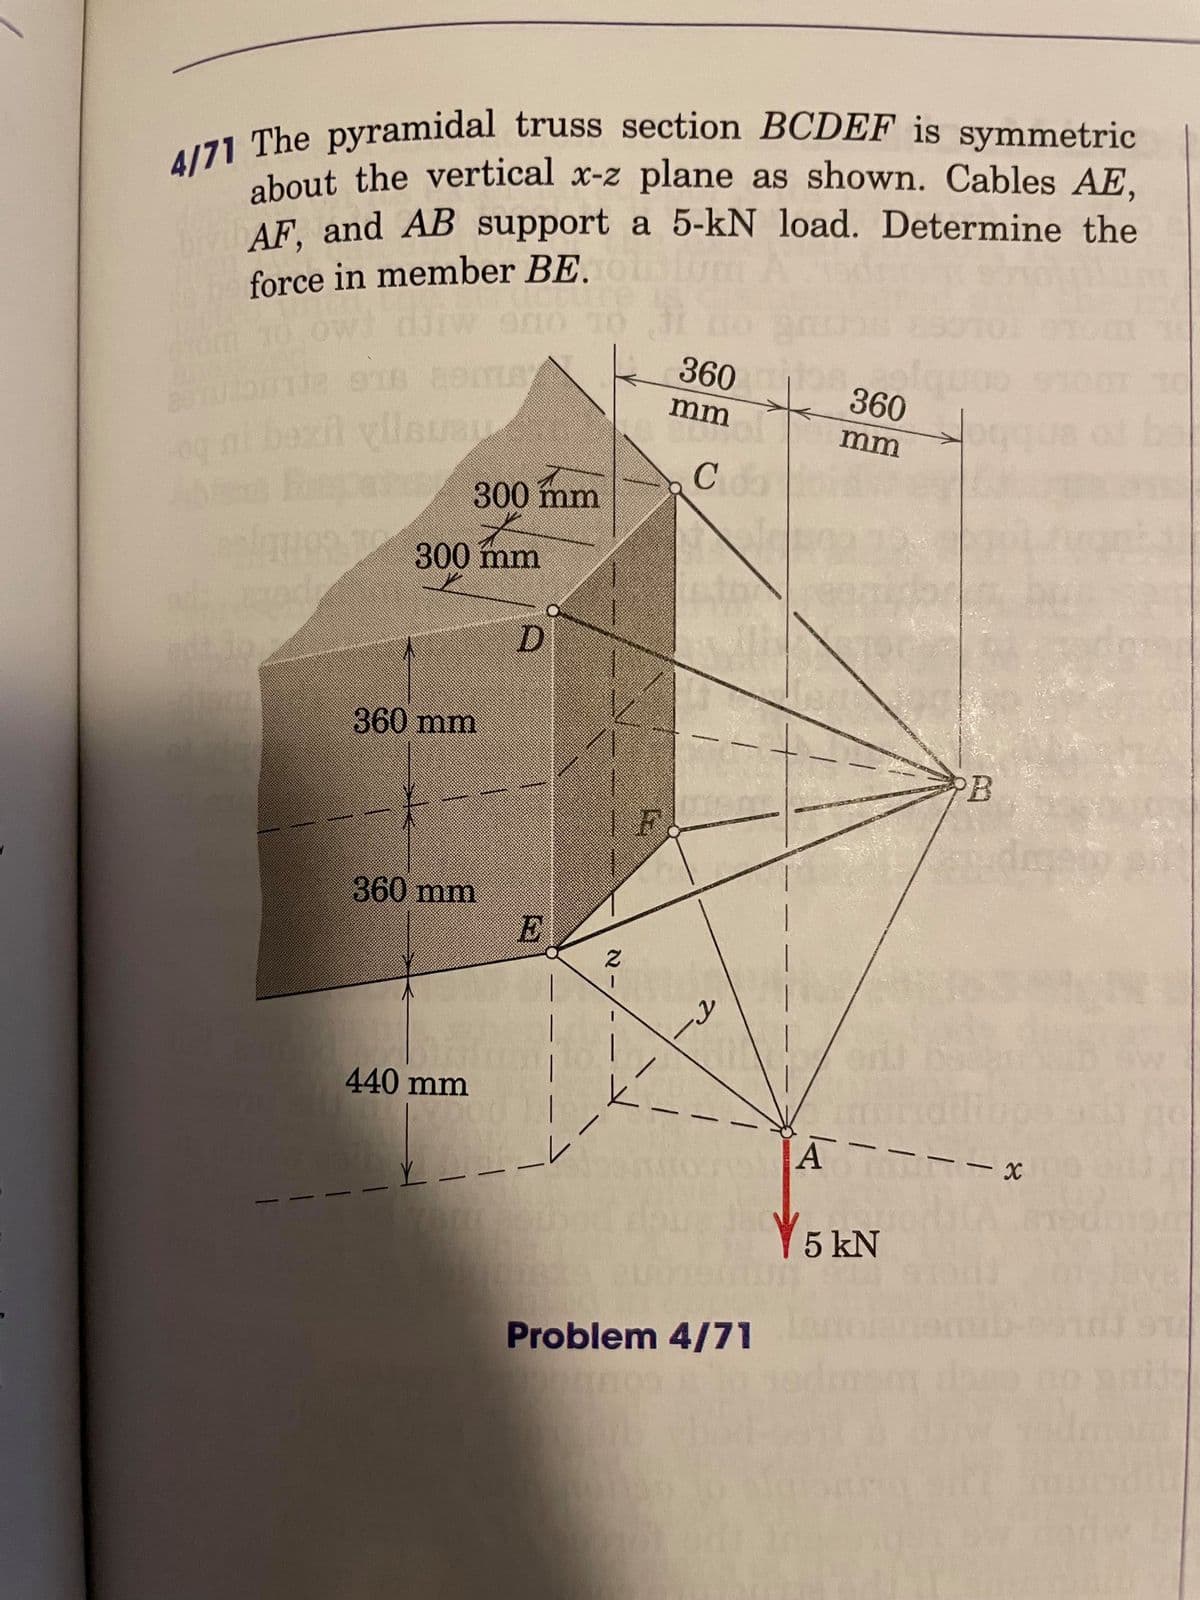 4/71 The pyramidal truss section BCDEF is symmetric
about the vertical x-z plane as shown. Cables AE.
AF, and AB support a 5-kN load. Determine the
force in member BE.
10 ow diw ono
360
360
mm
mm
bexil vllsuau
C
300 mm
alqug 300 mm
D
360 mm
PB
360 mm
440 mm
A
5 kN
Problem 4/71
